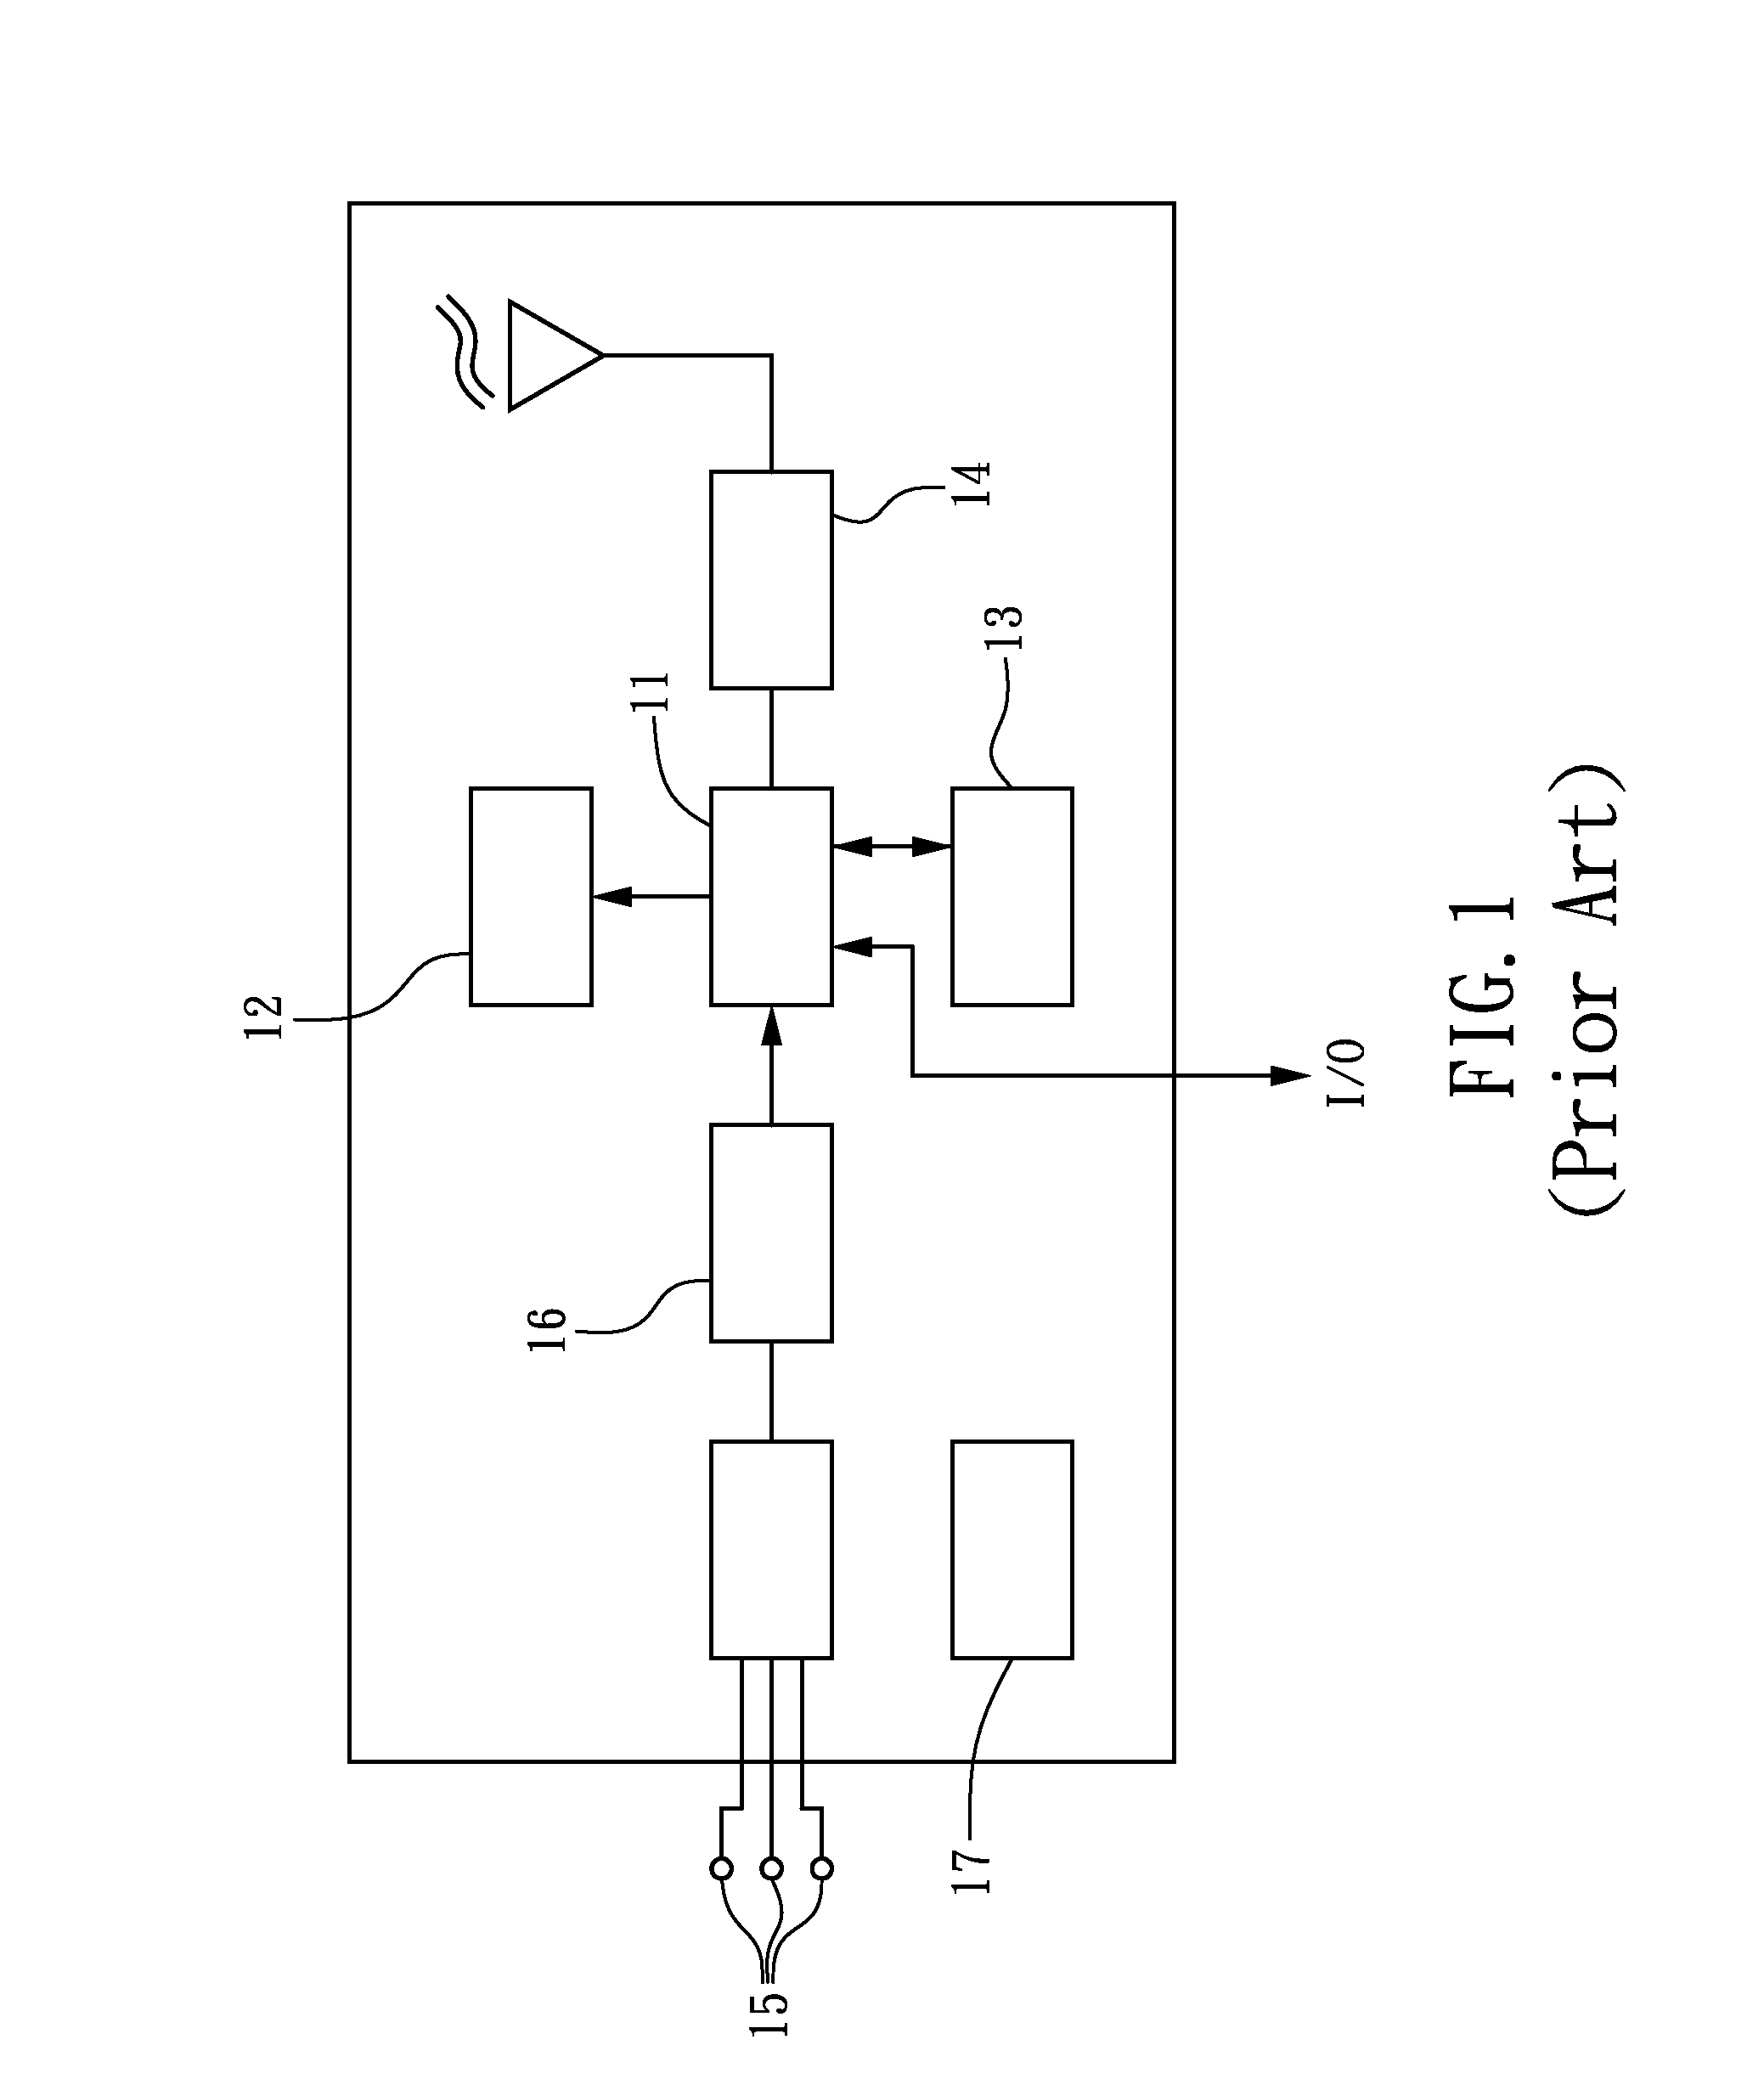 Flexible biomonitor with EMI shielding and module expansion